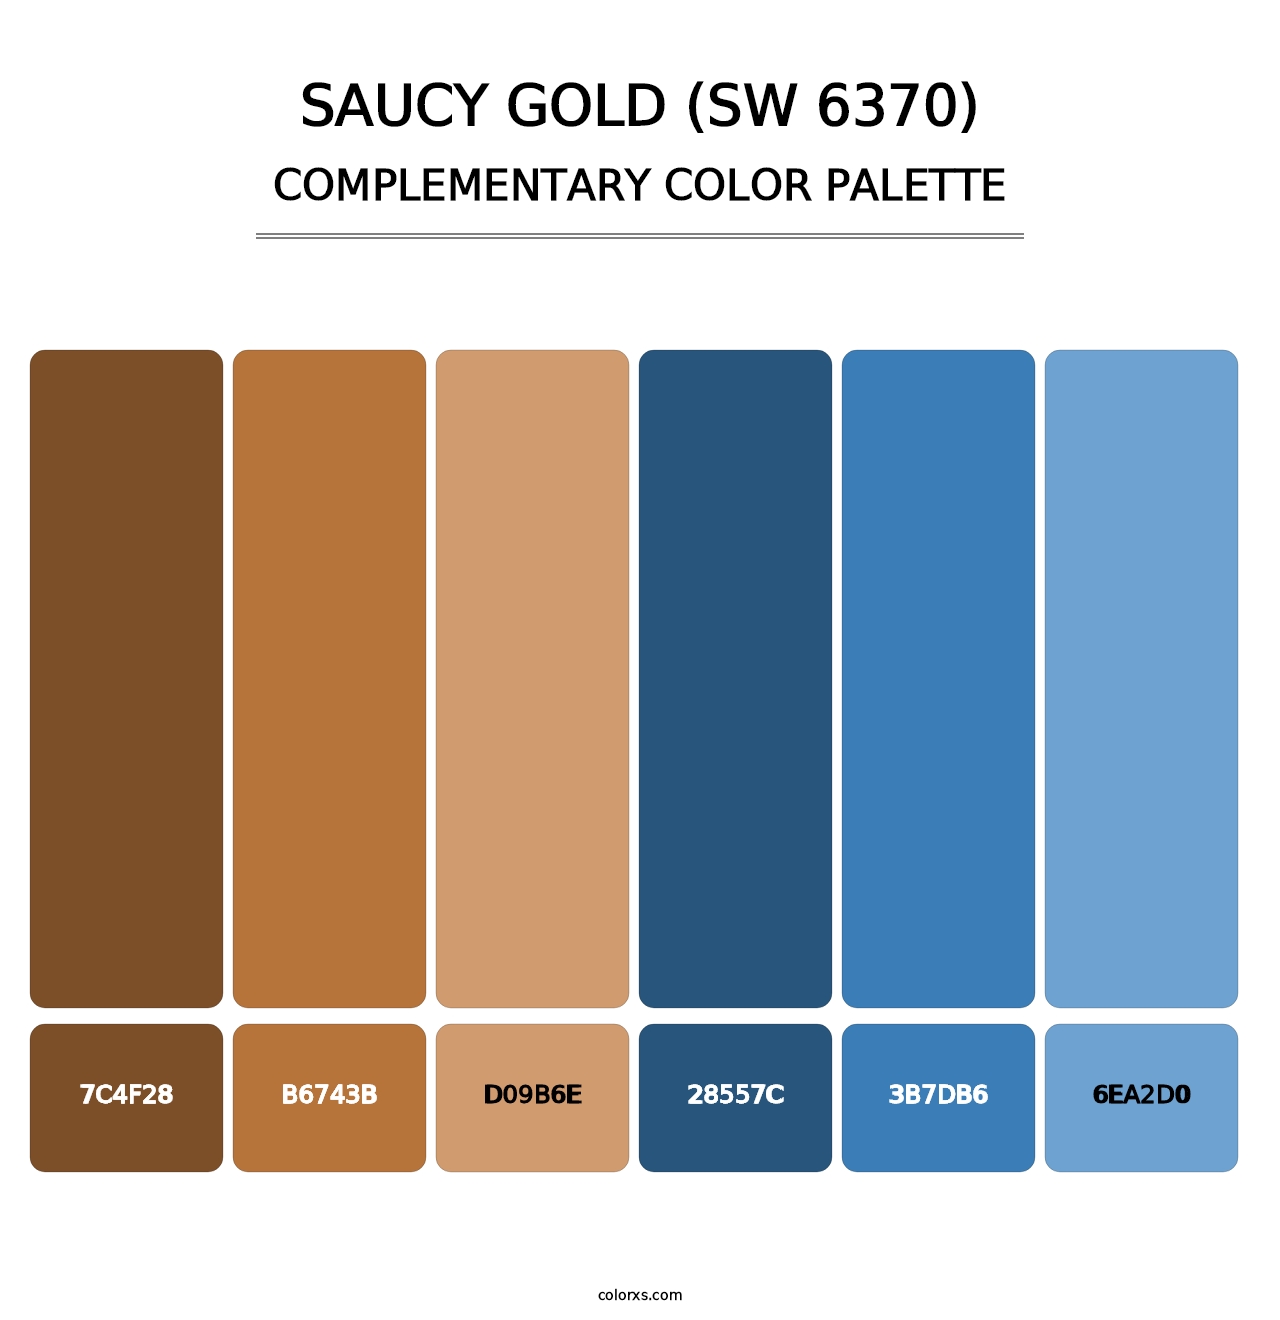 Saucy Gold (SW 6370) - Complementary Color Palette